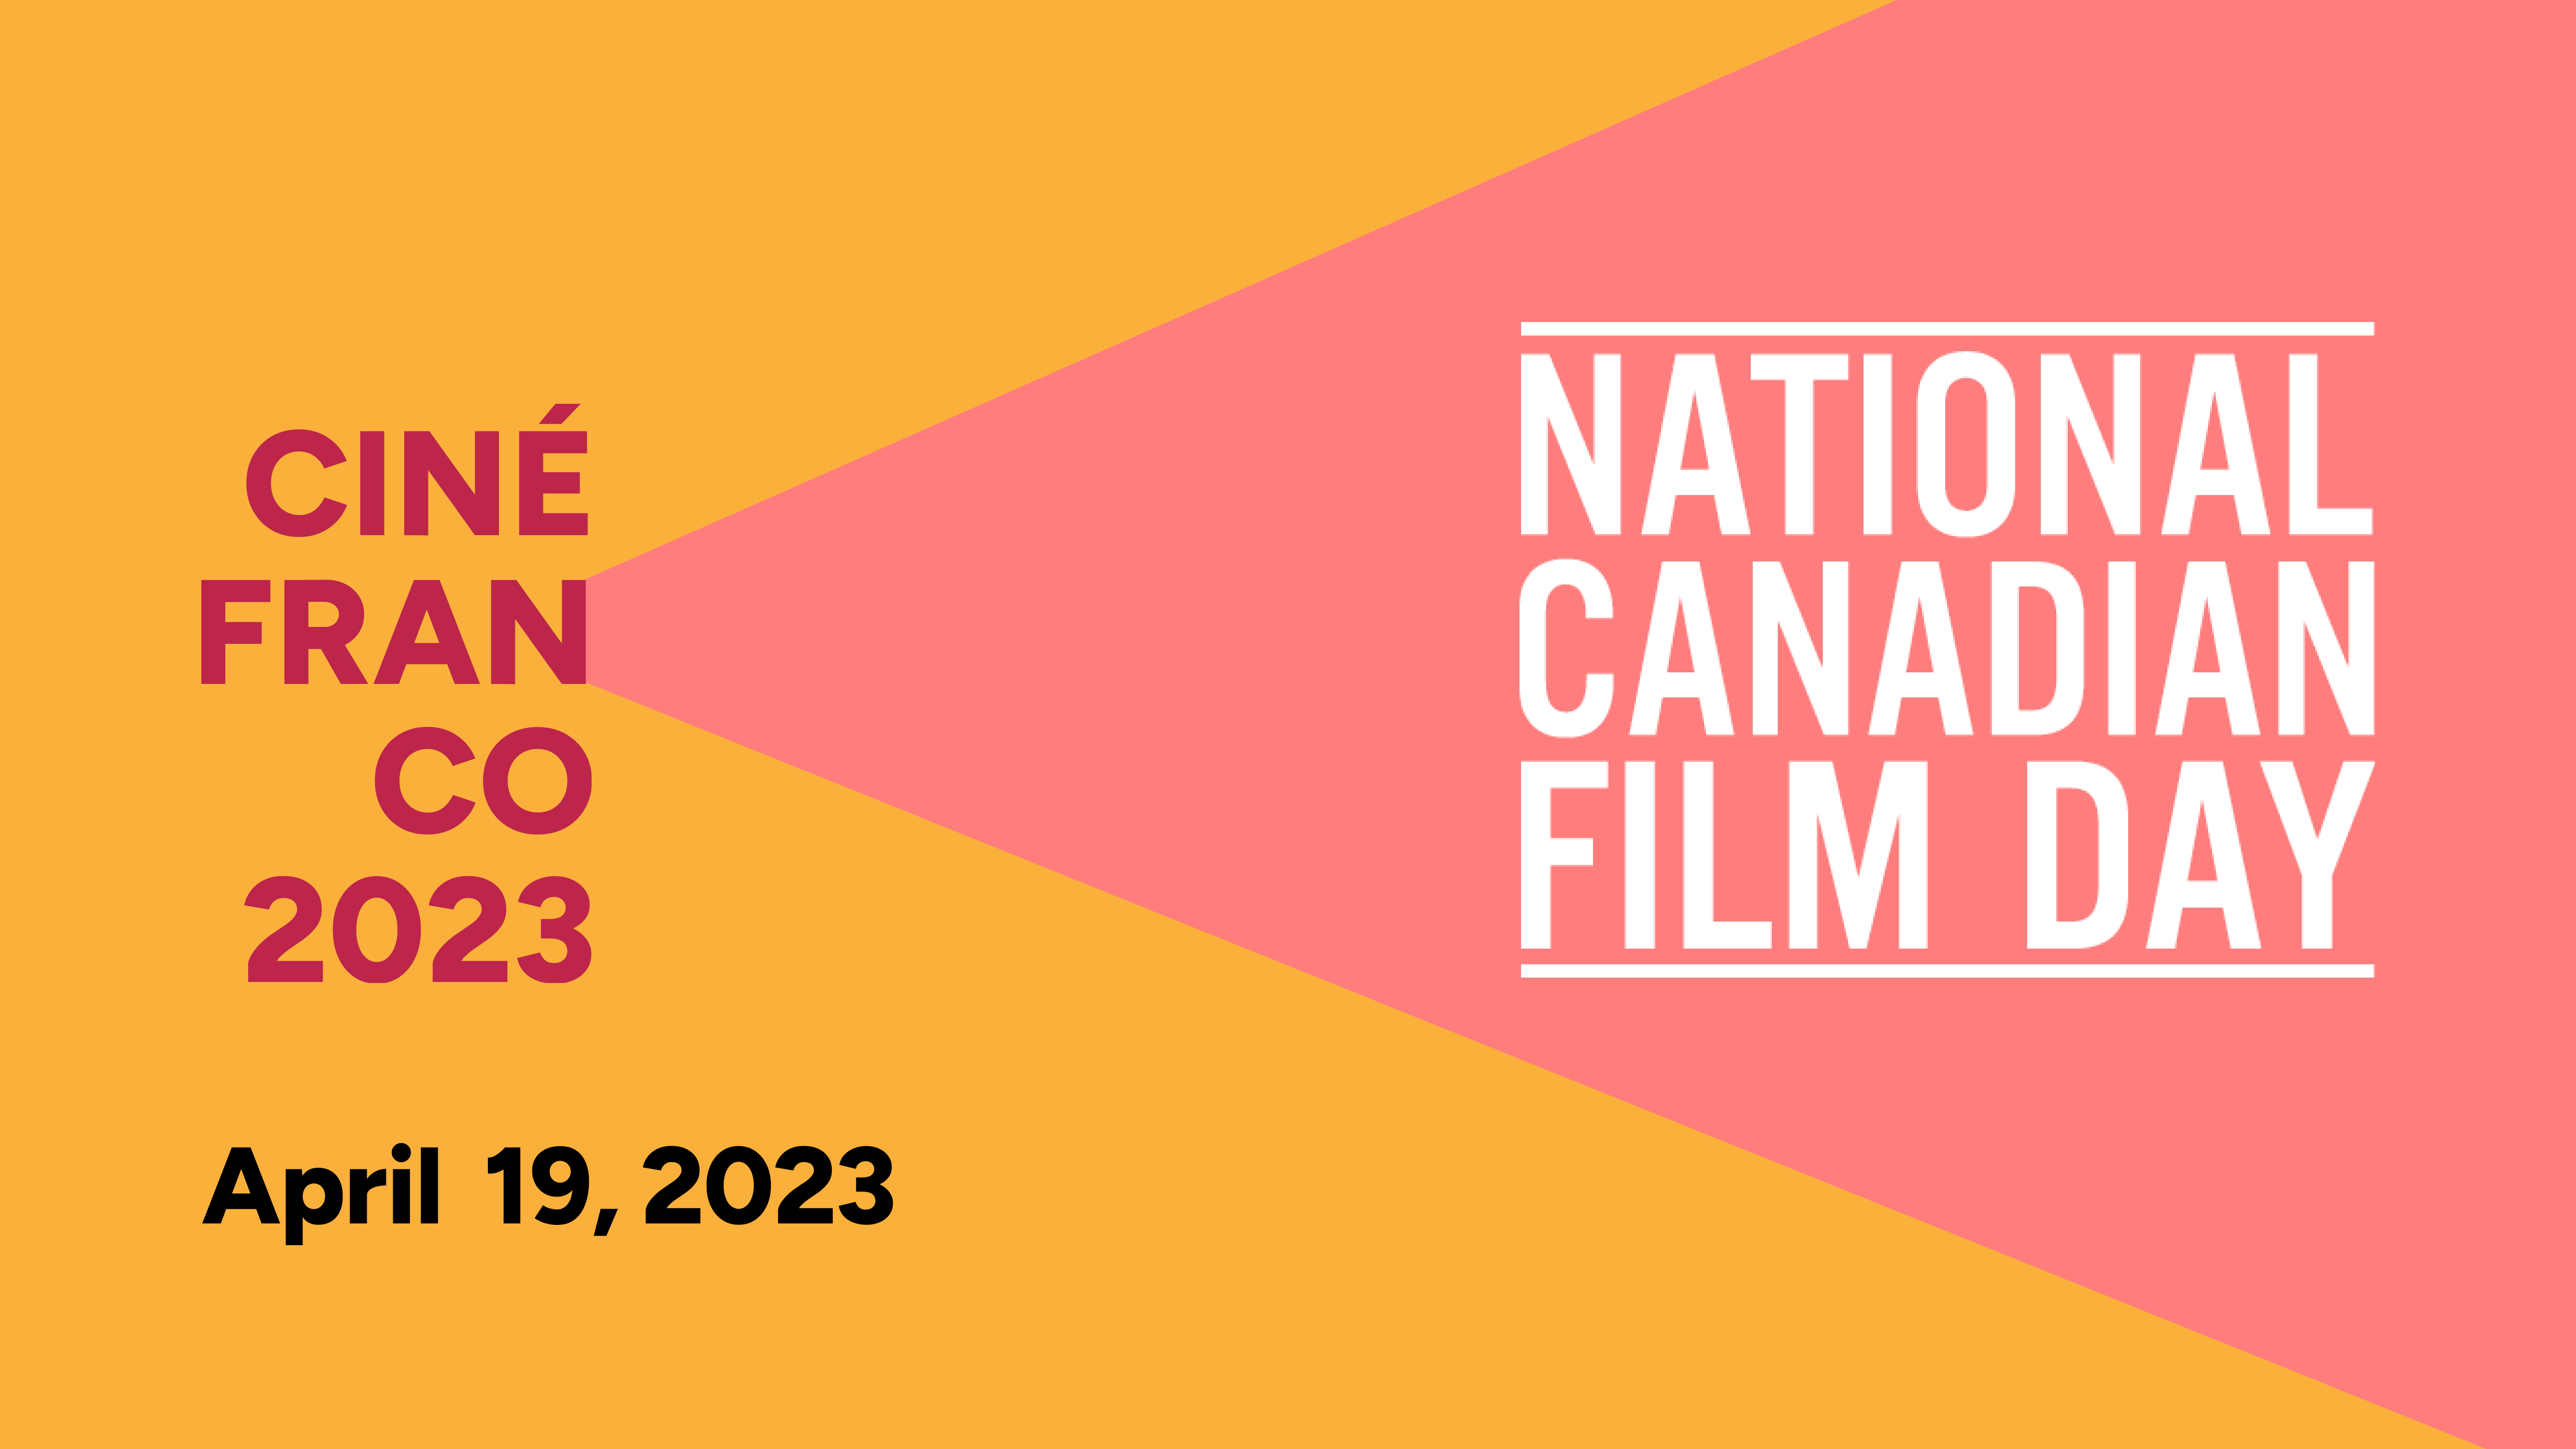 Canadian Film Day